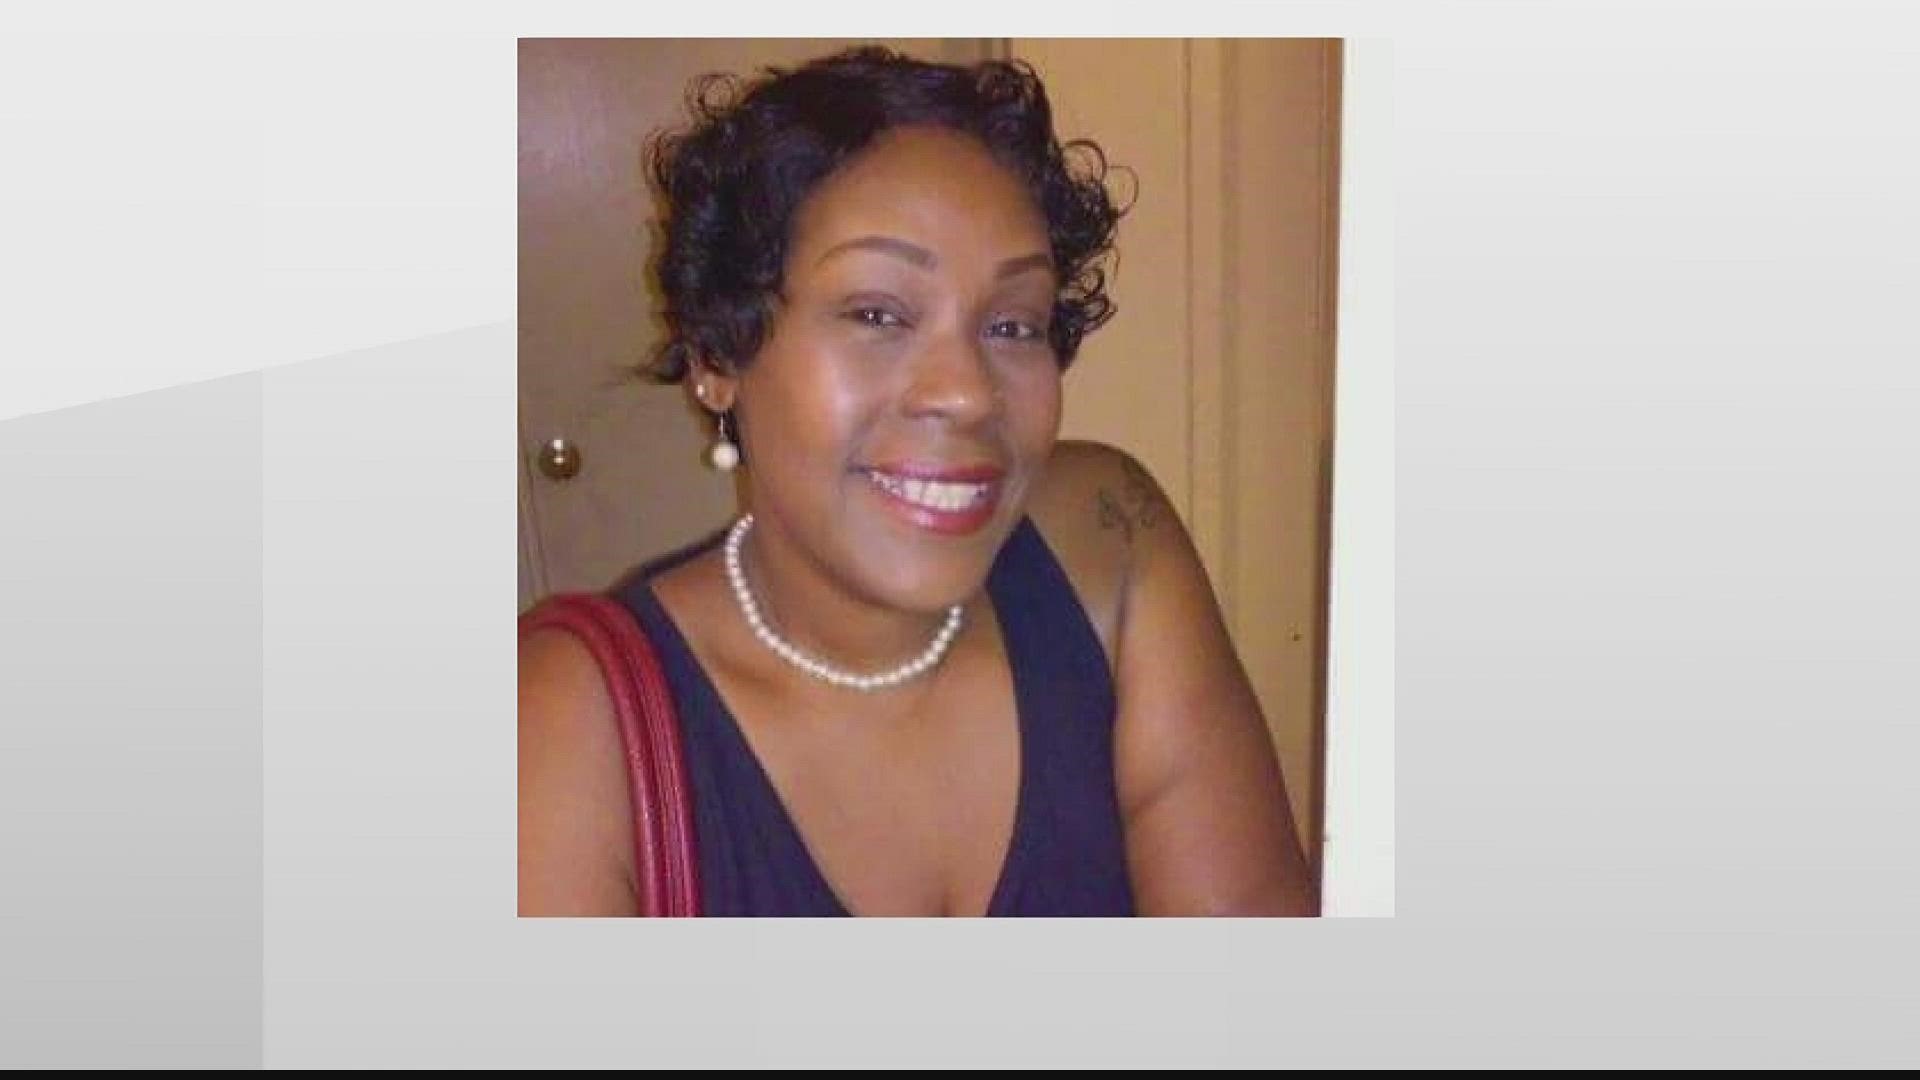 Authorities said Jacqueline Rolle was last seen at Grady Hospital on Friday, June 17.